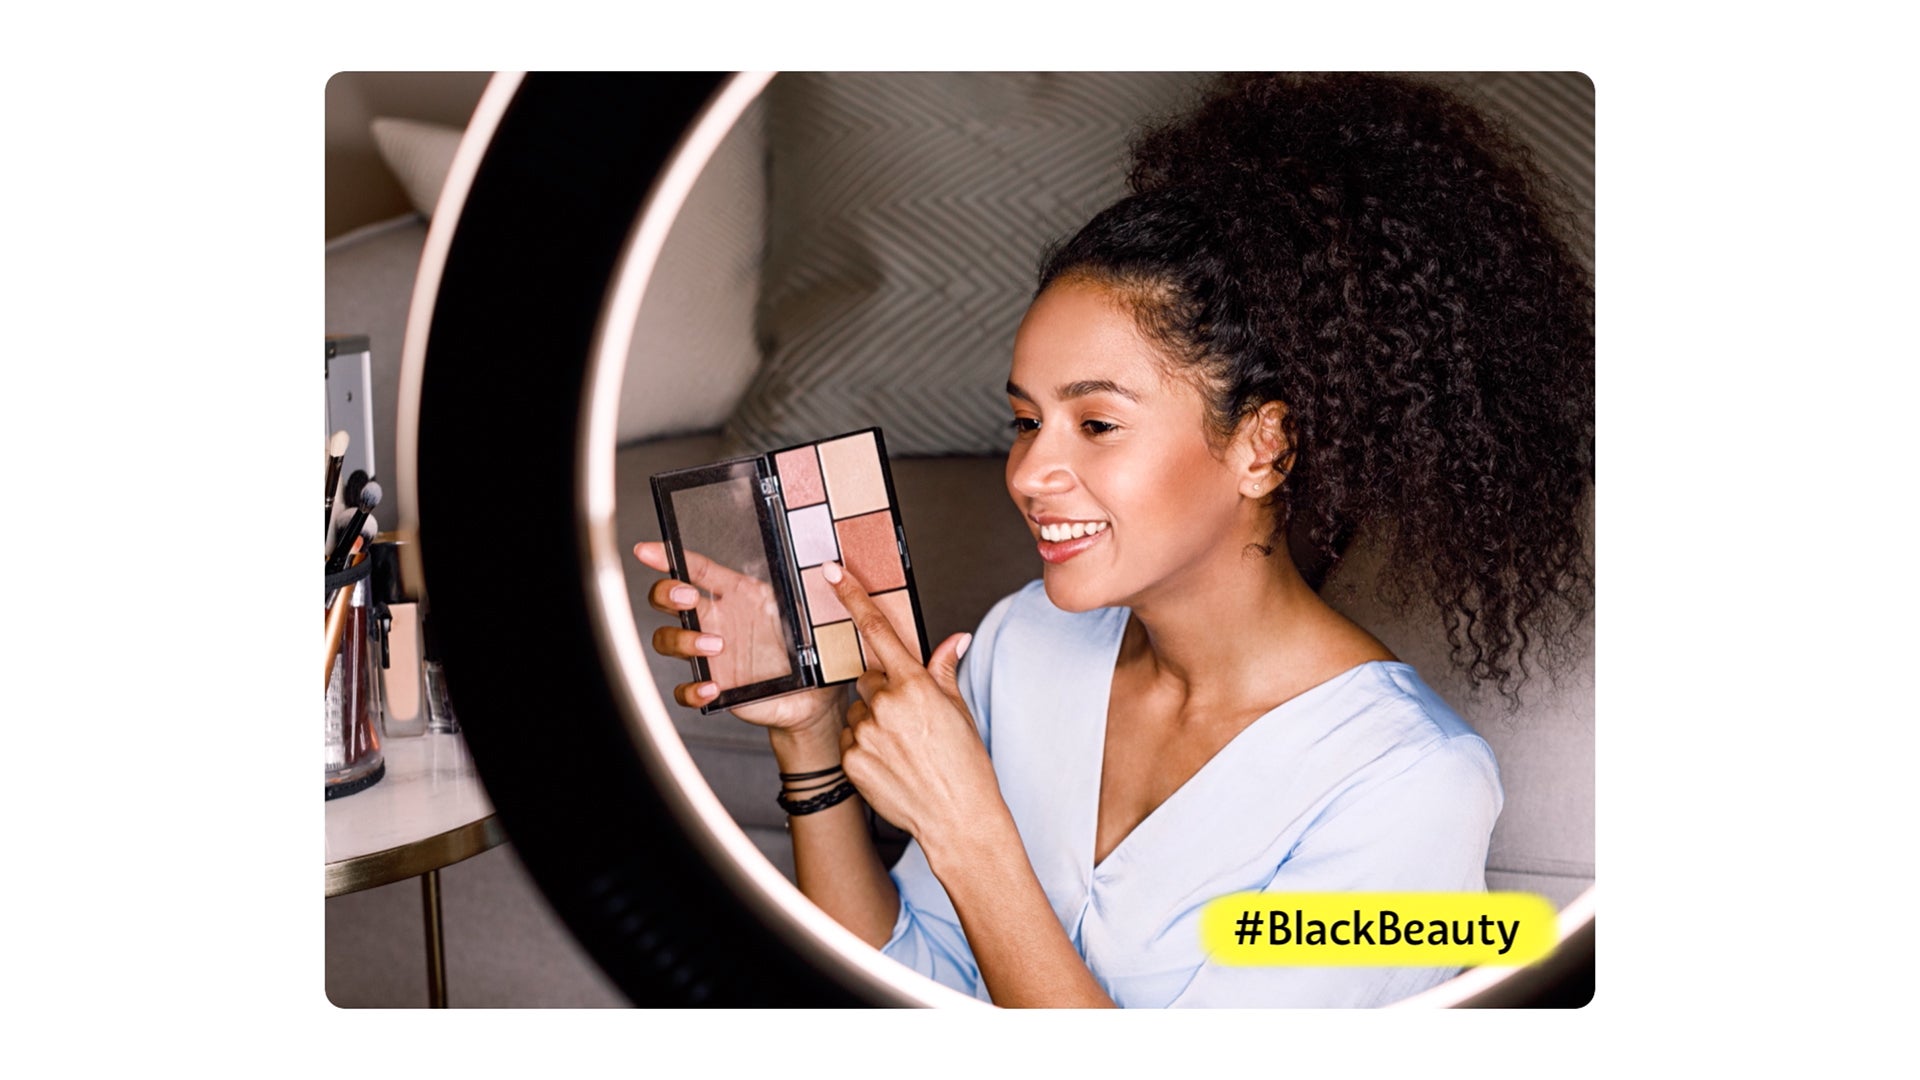 Sephora Initiates Campaign To Bring Black Beauty To The Top Of Google Search Engines